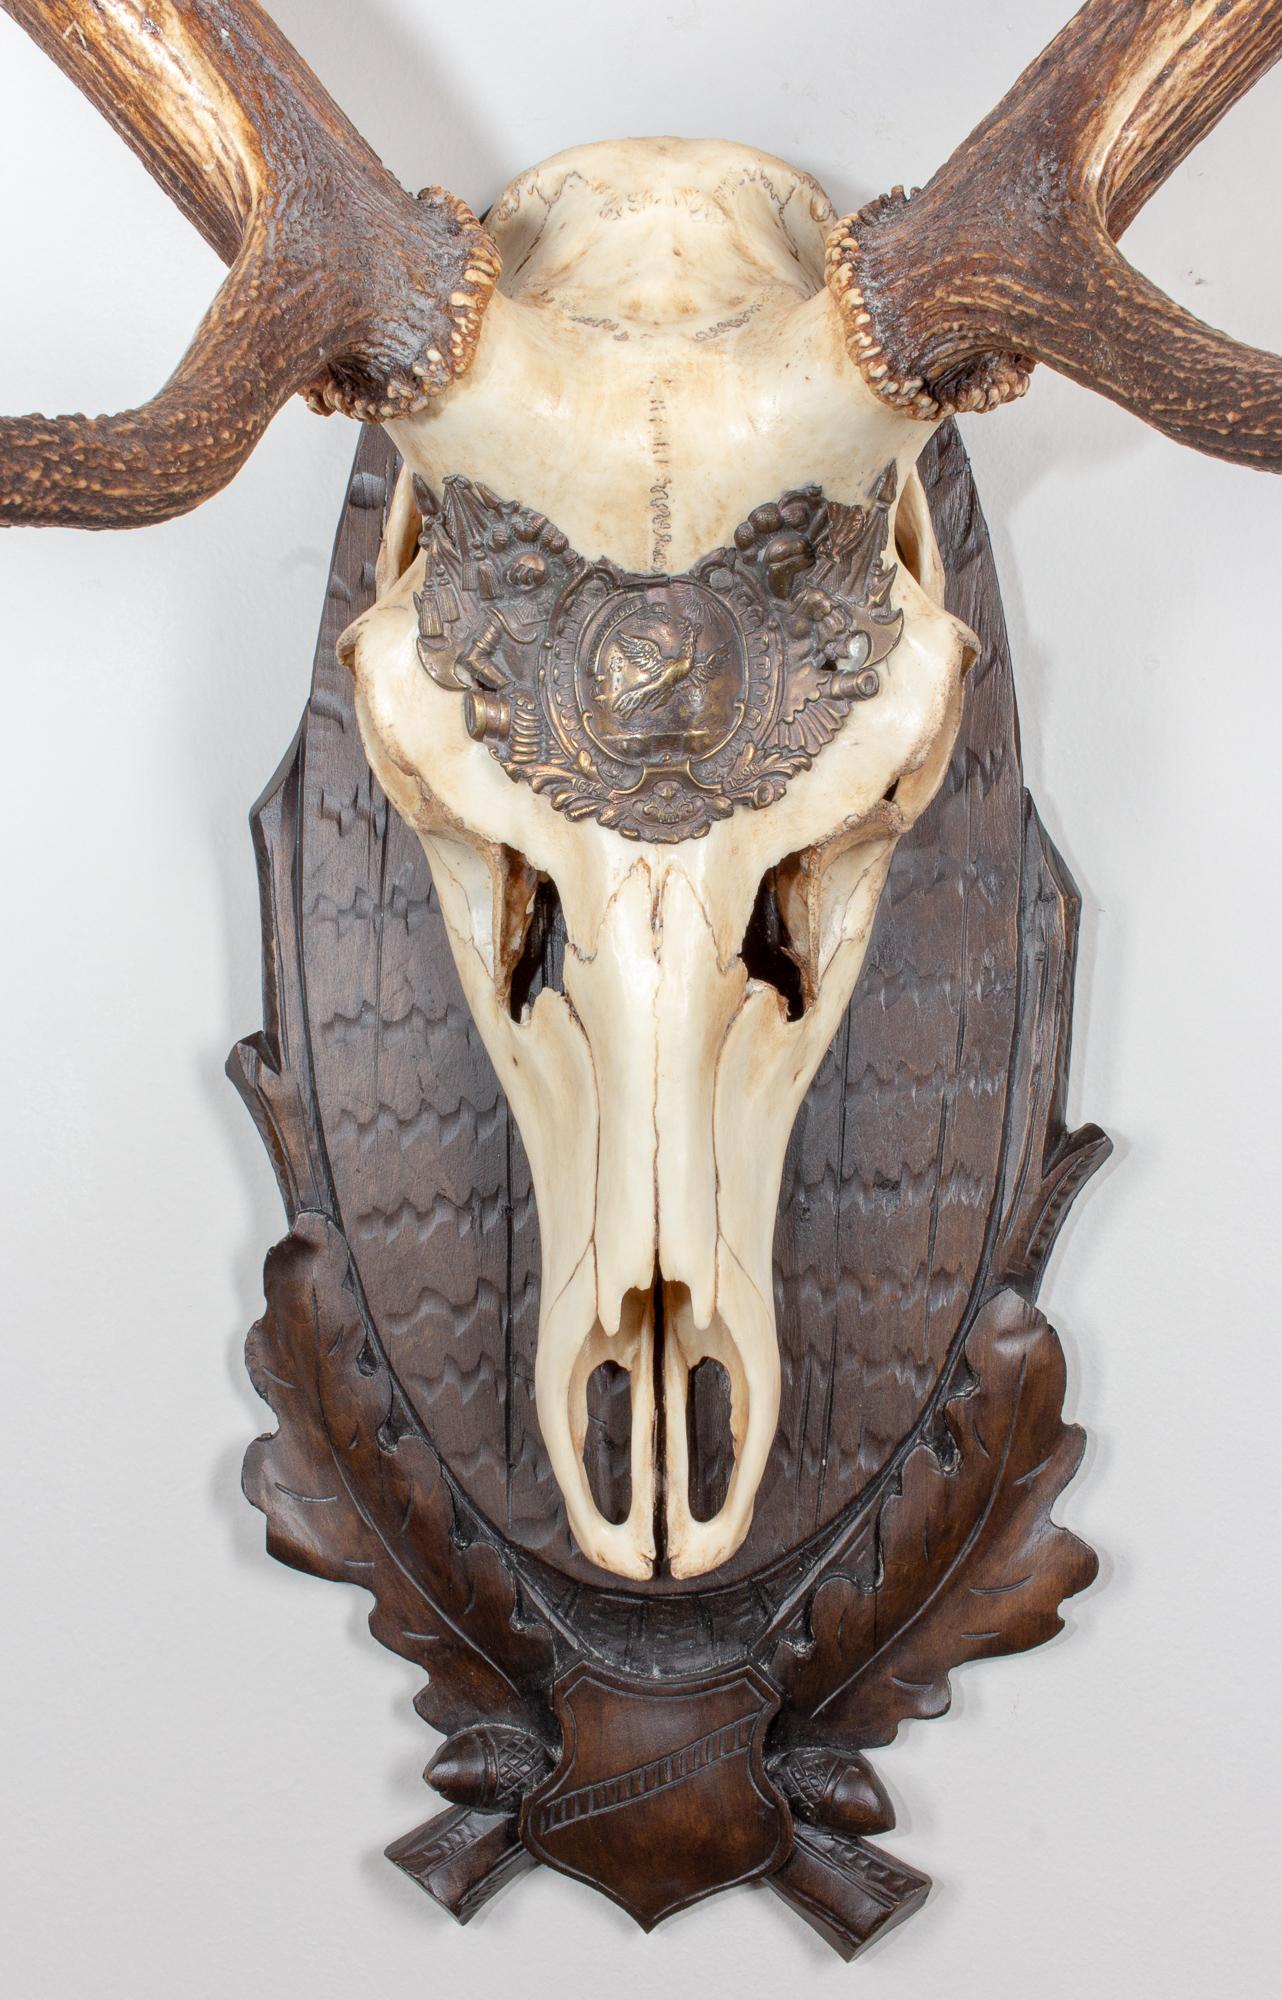 19th century Austrian red stag trophy on original black forest carved plaque that hung in Emperor Franz Josef's castle at Eckartsau in the Southern Austrian Alps. Eckartsau was a favourite hunting schloss of the Habsburg family. The plaque itself is